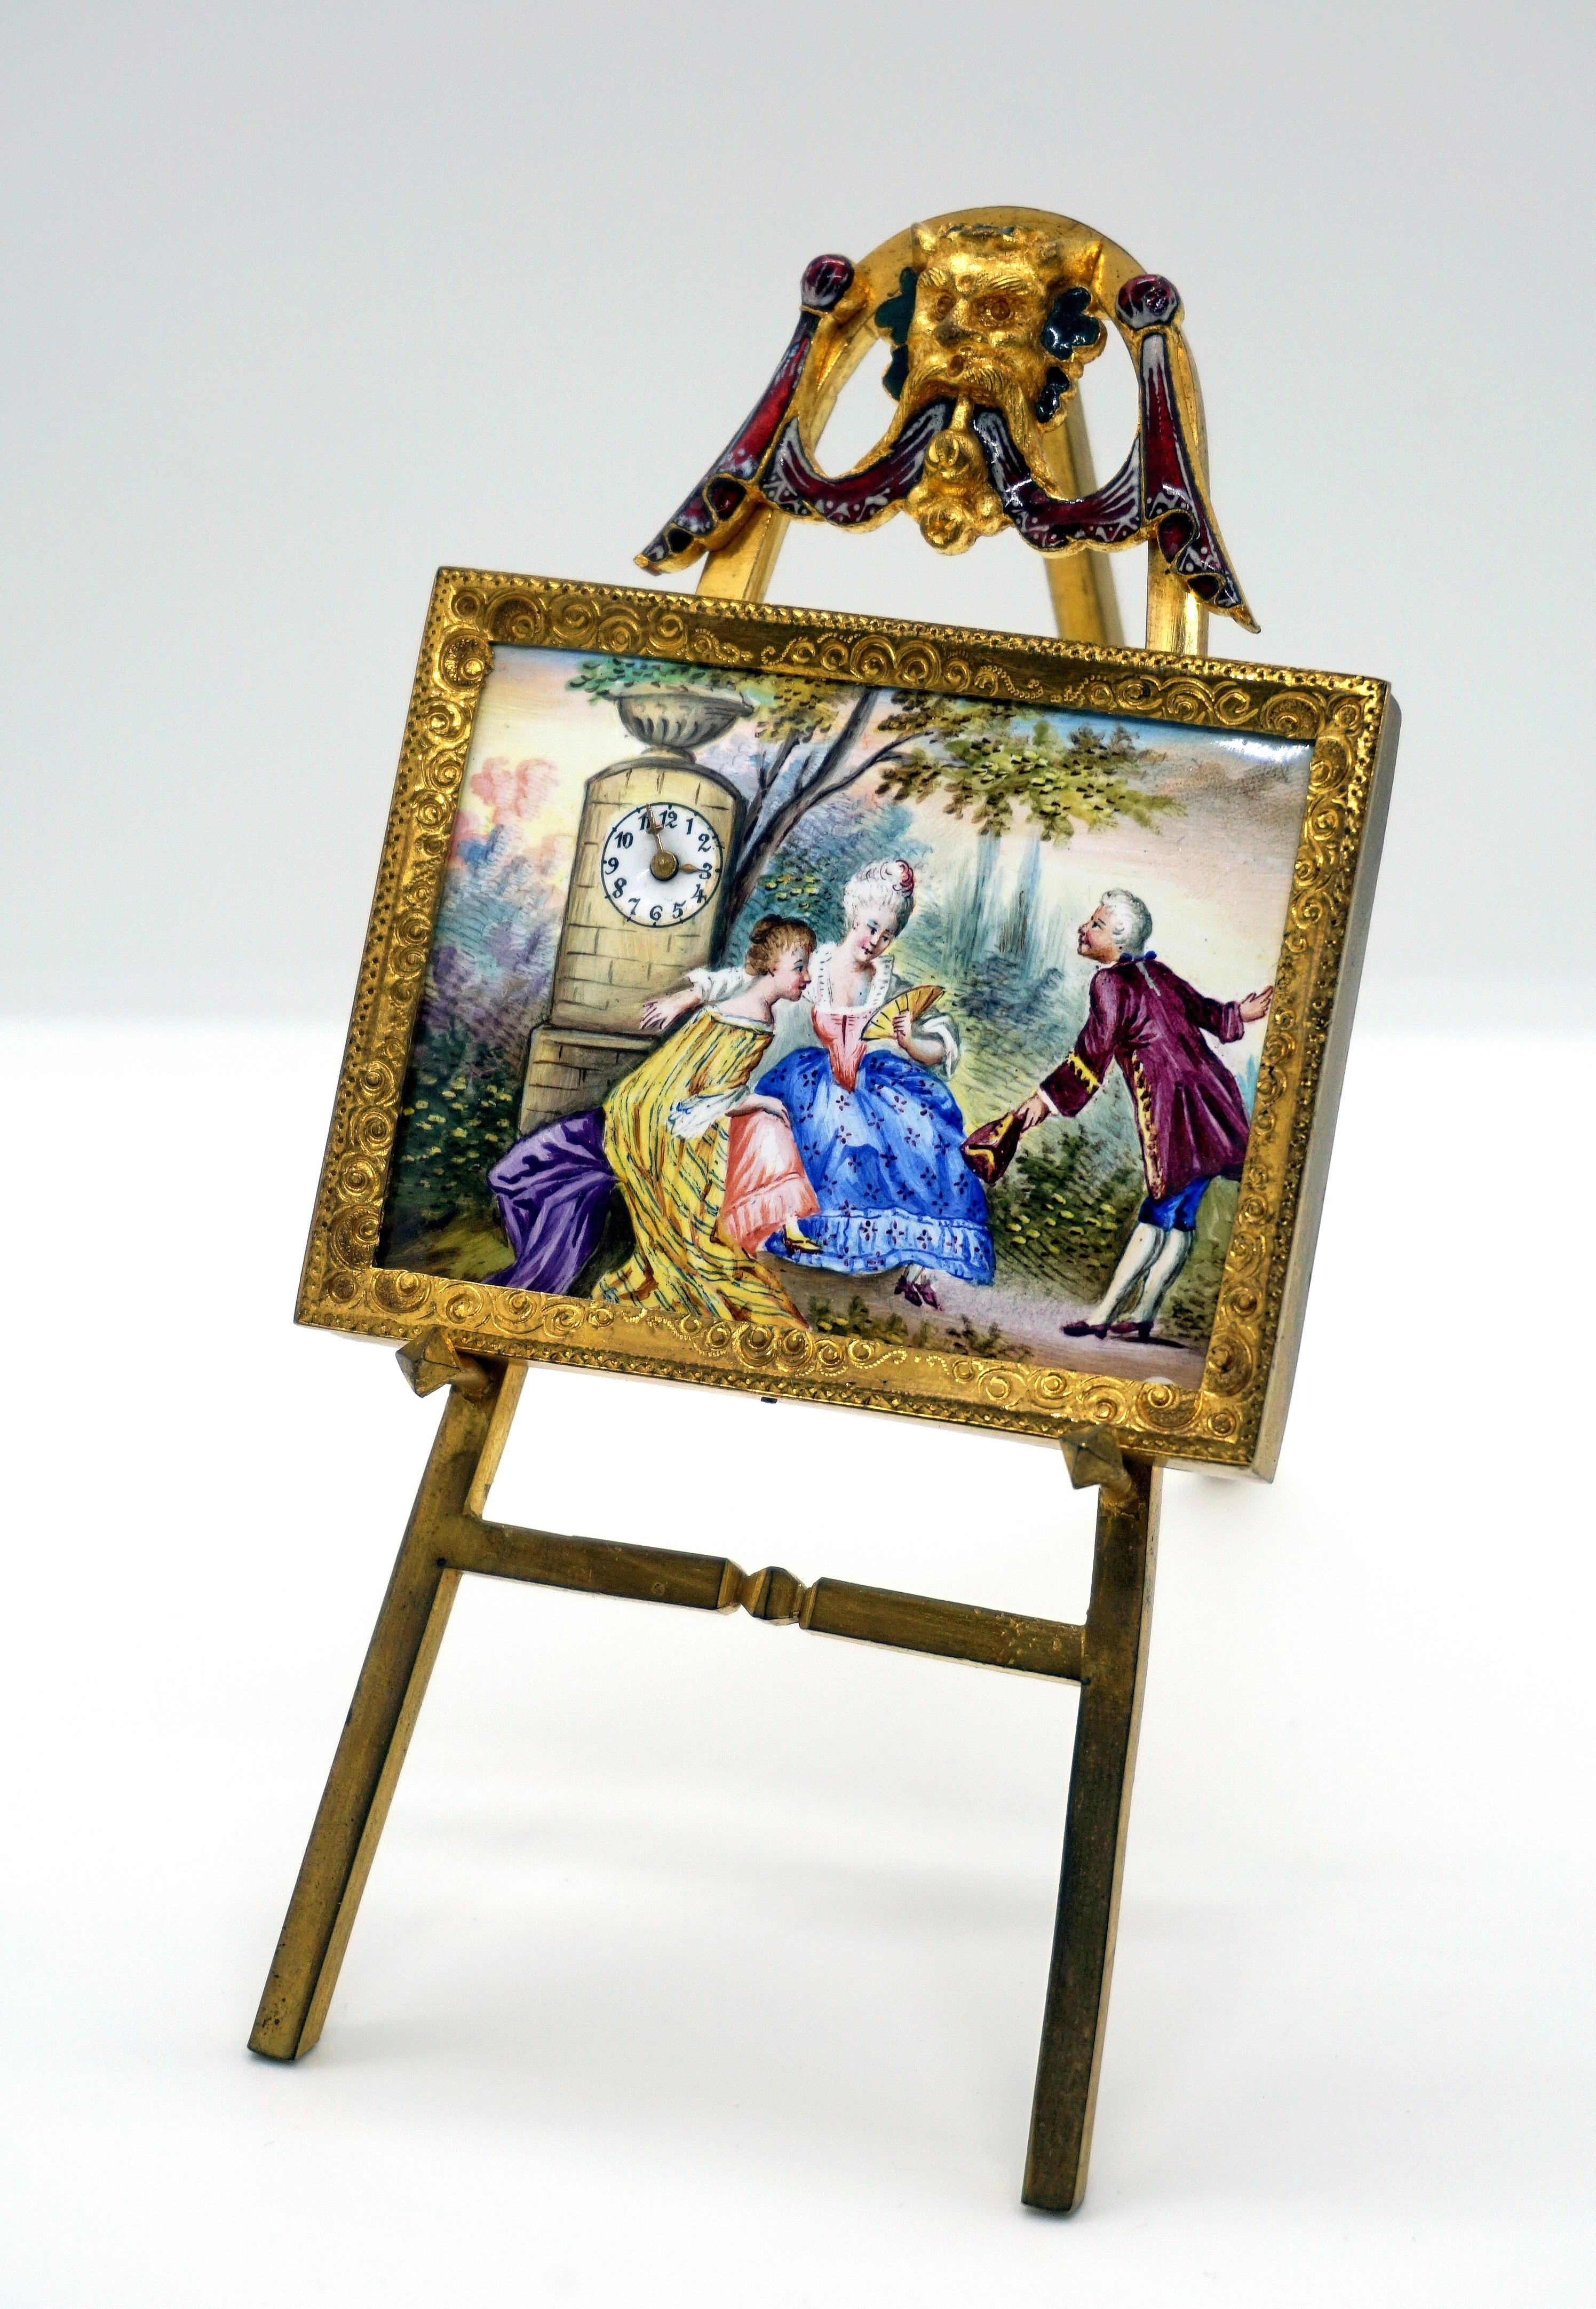 Exquisite Vienna enamel picture clock from the period circa 1880

Casing made of brass. On the front polychrome enamel painting - Watteau scenery: A gallant gentleman courting two ladies sitting in front of a column on the edge of the path, in